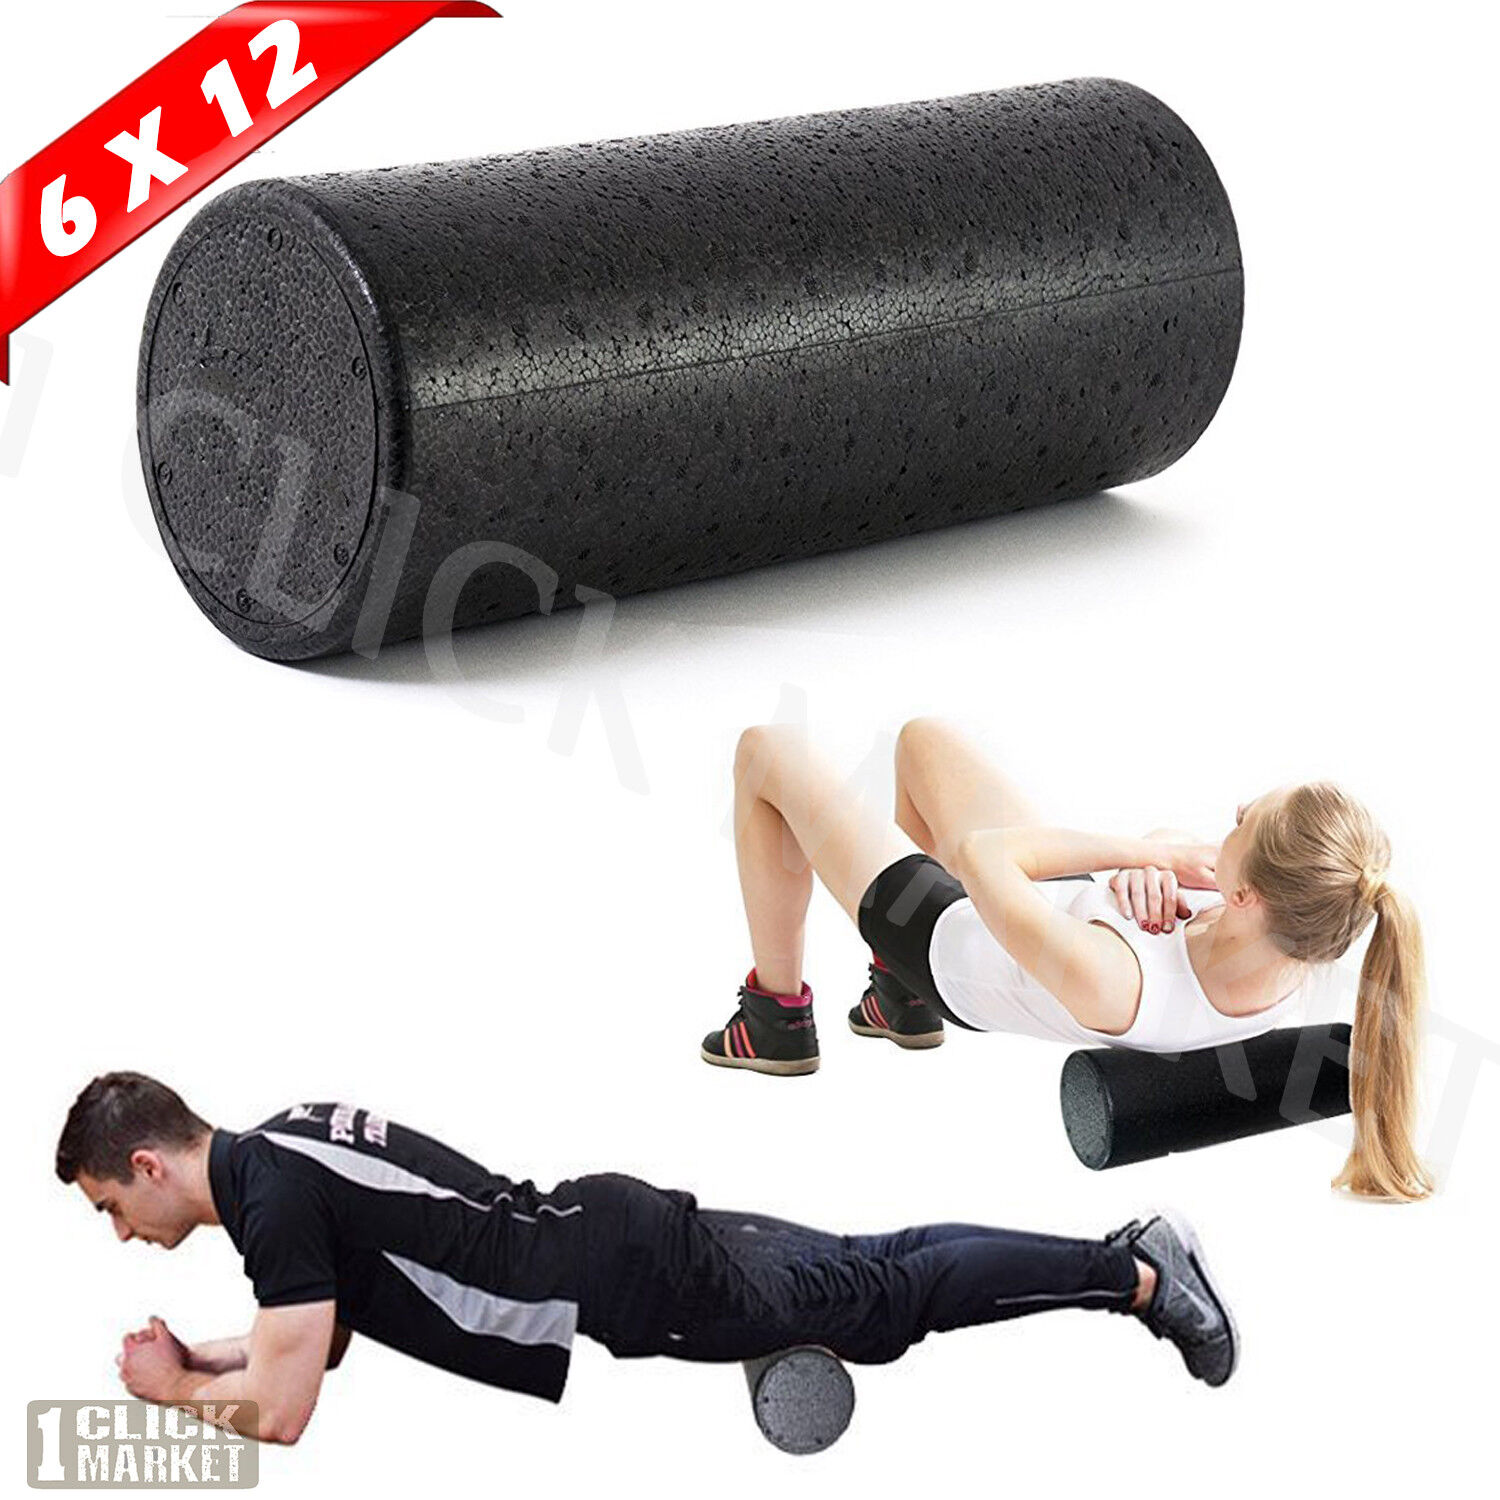 Back Pain Deep Massage Muscle Therapy Pilates Yoga Gear